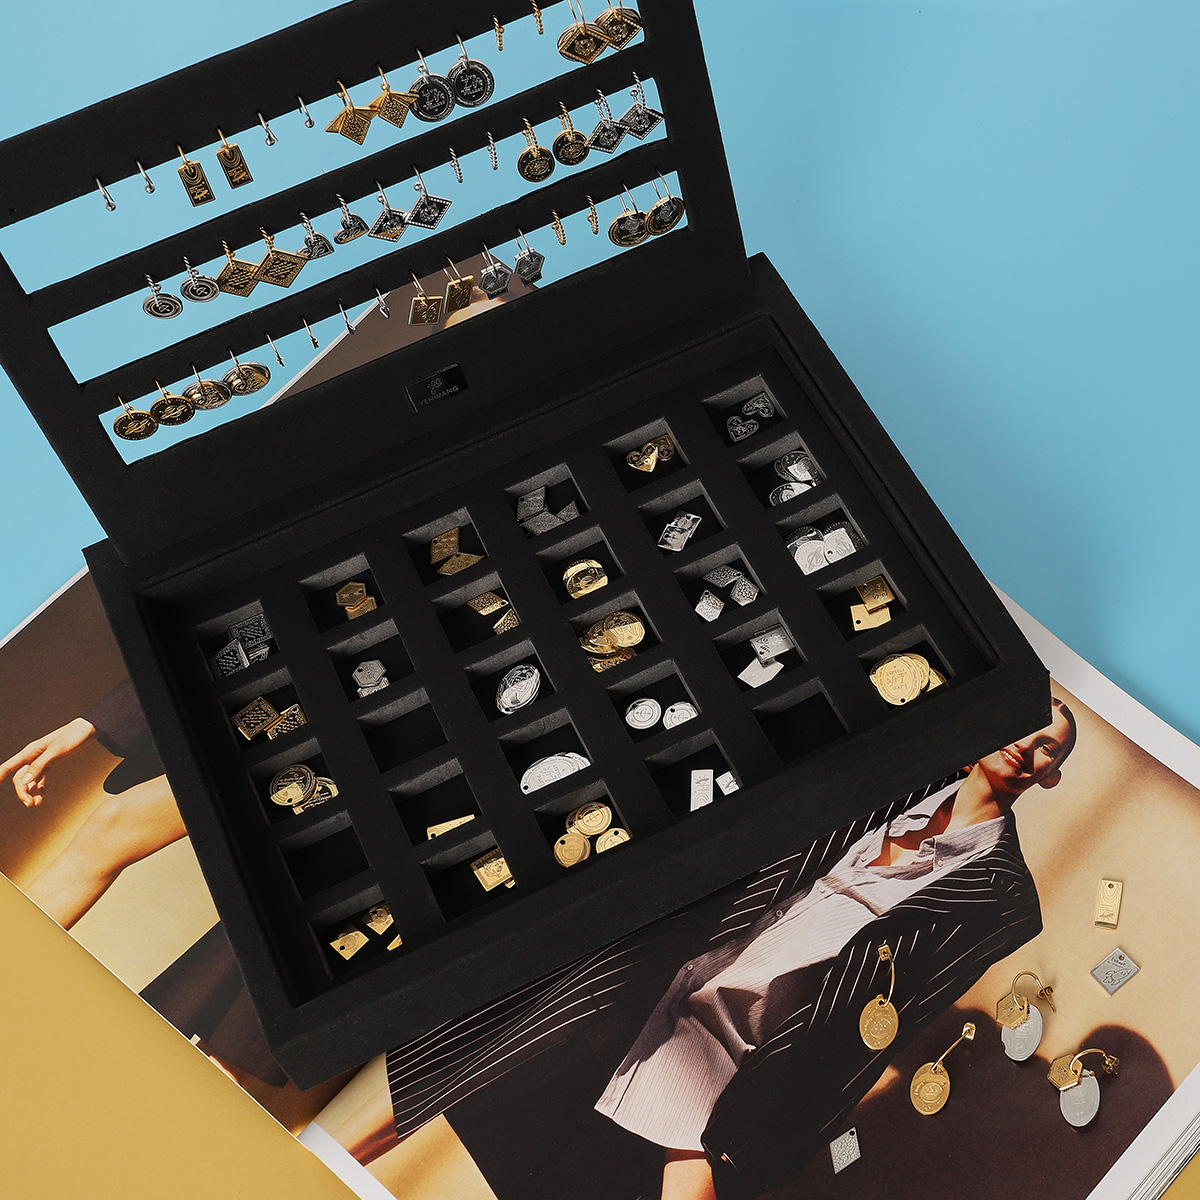 Customize your earrings with our new Display Perfect Mix & Match